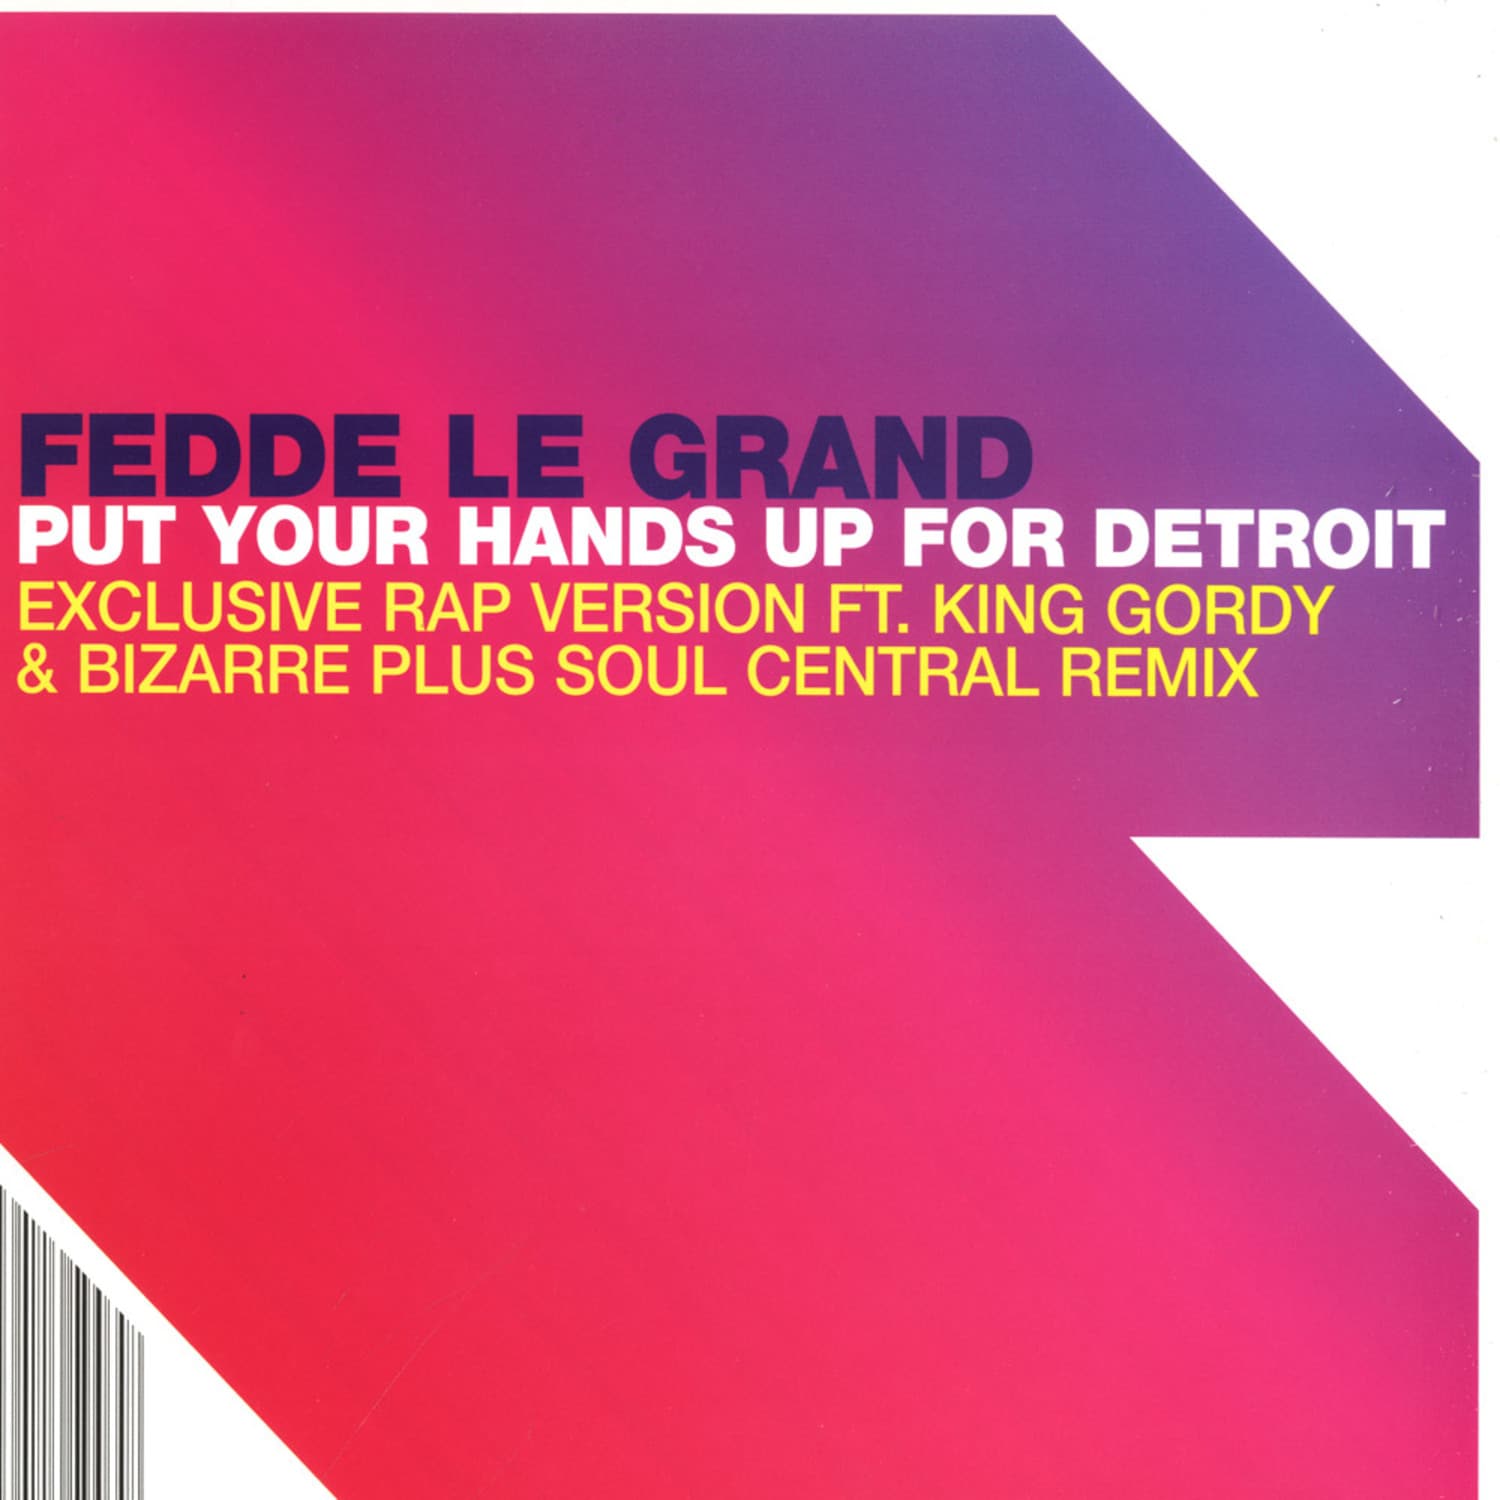 Fedde Le Grand - PUT YOUR HANDS UP FOR DETROIT